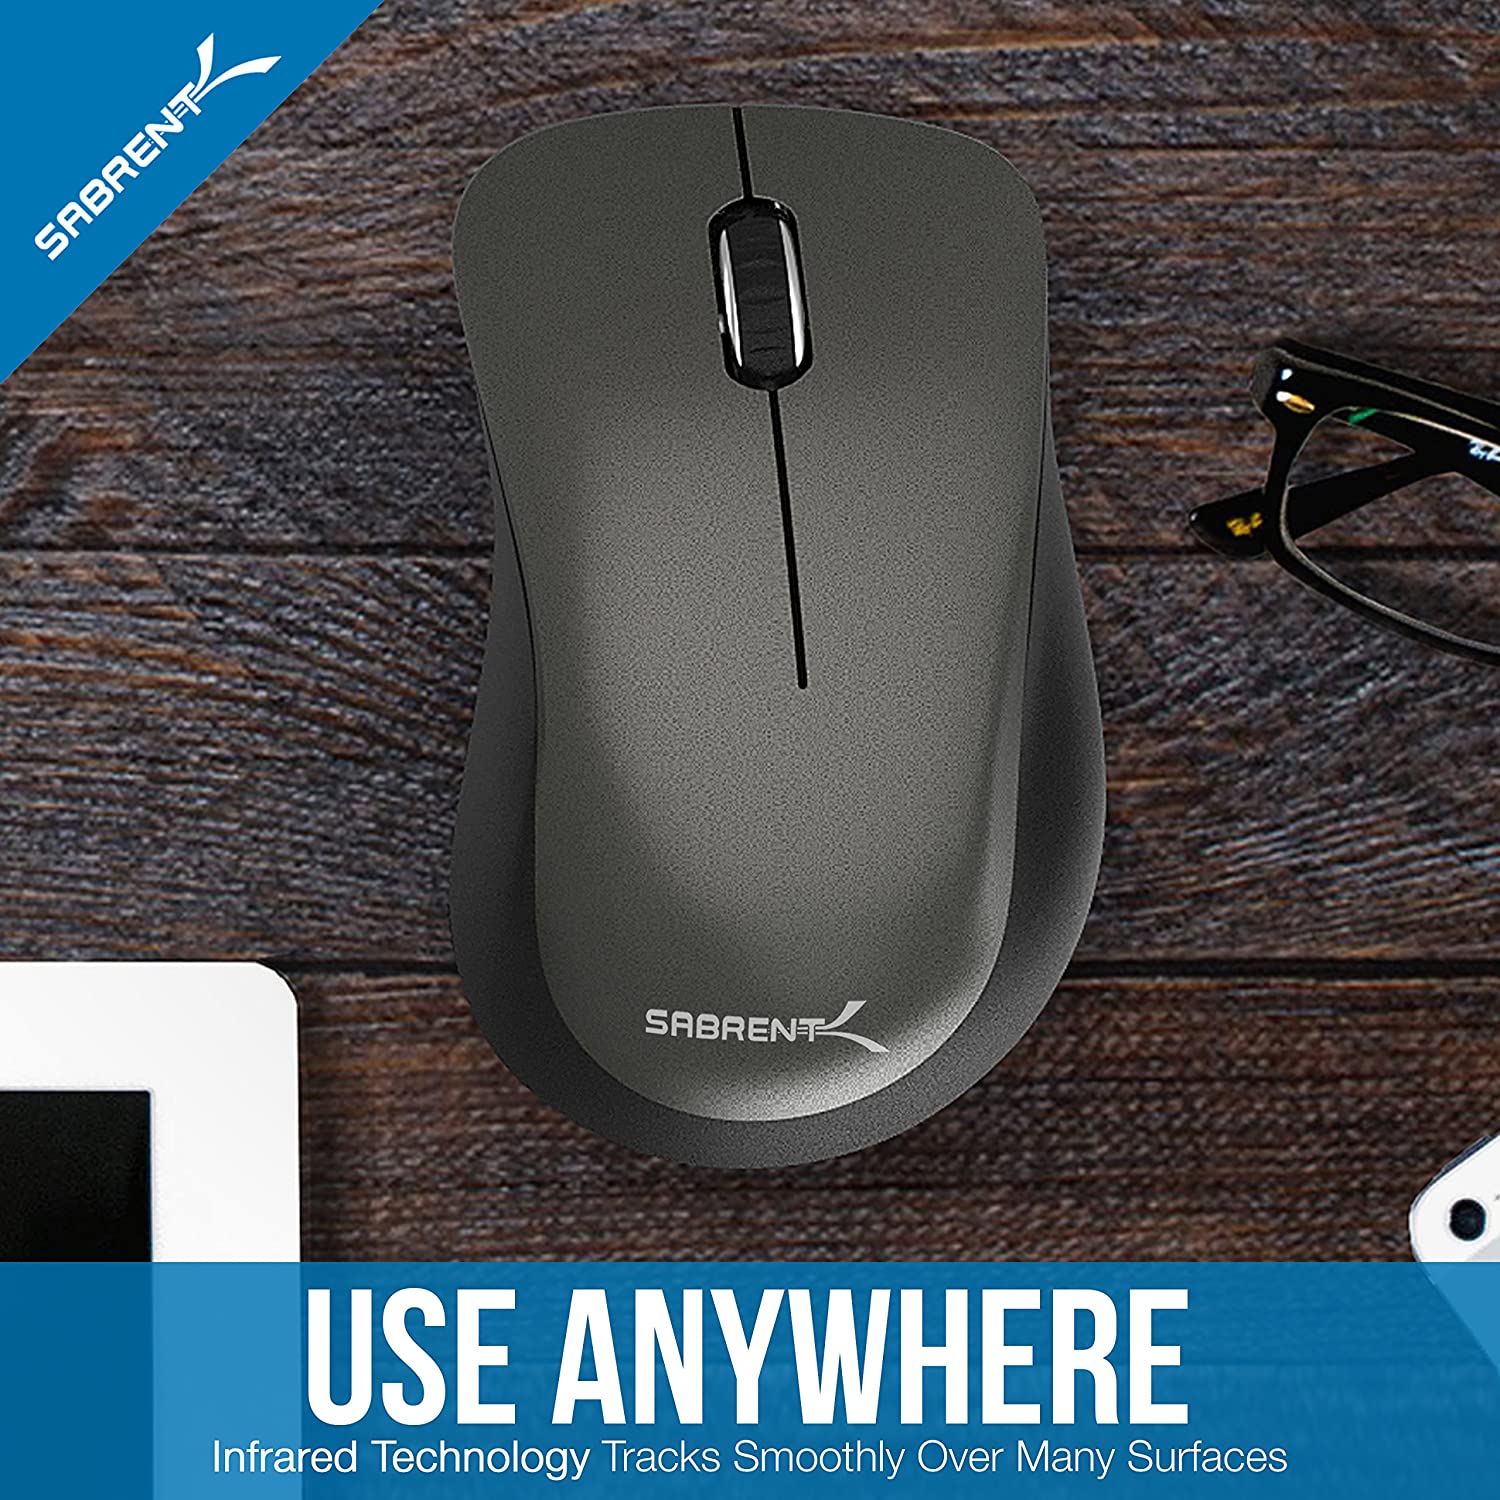 Sabrent 3-Button Bluetooth Optical Mouse Mice anywhere